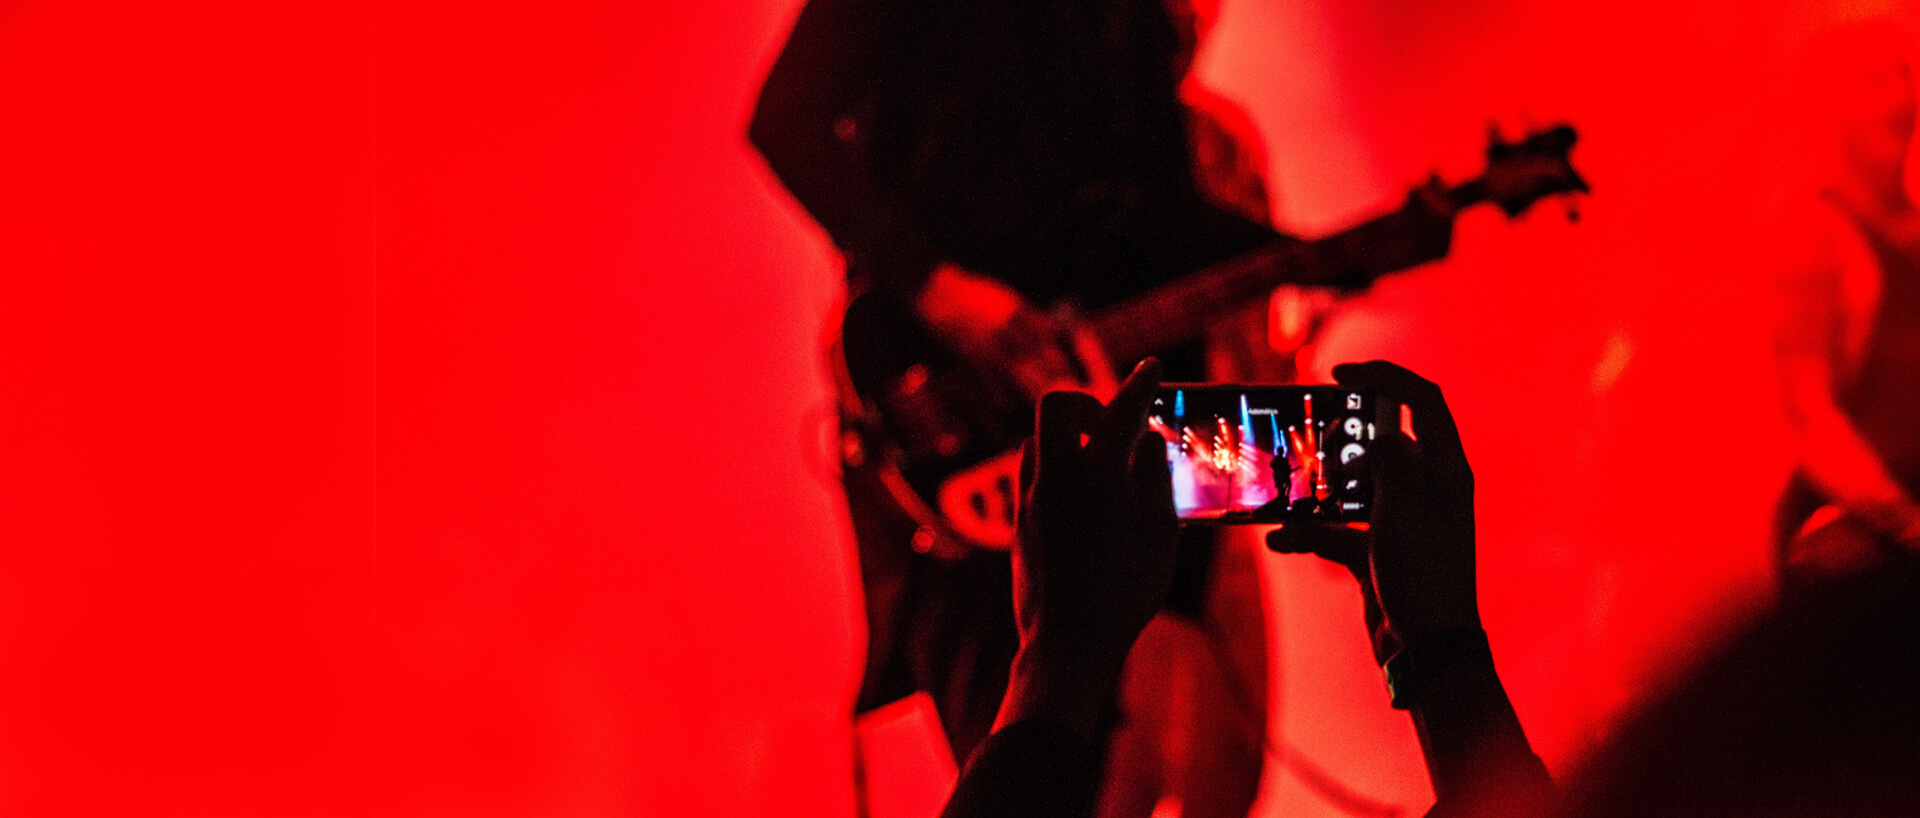 An audience member records a concert with his phone.